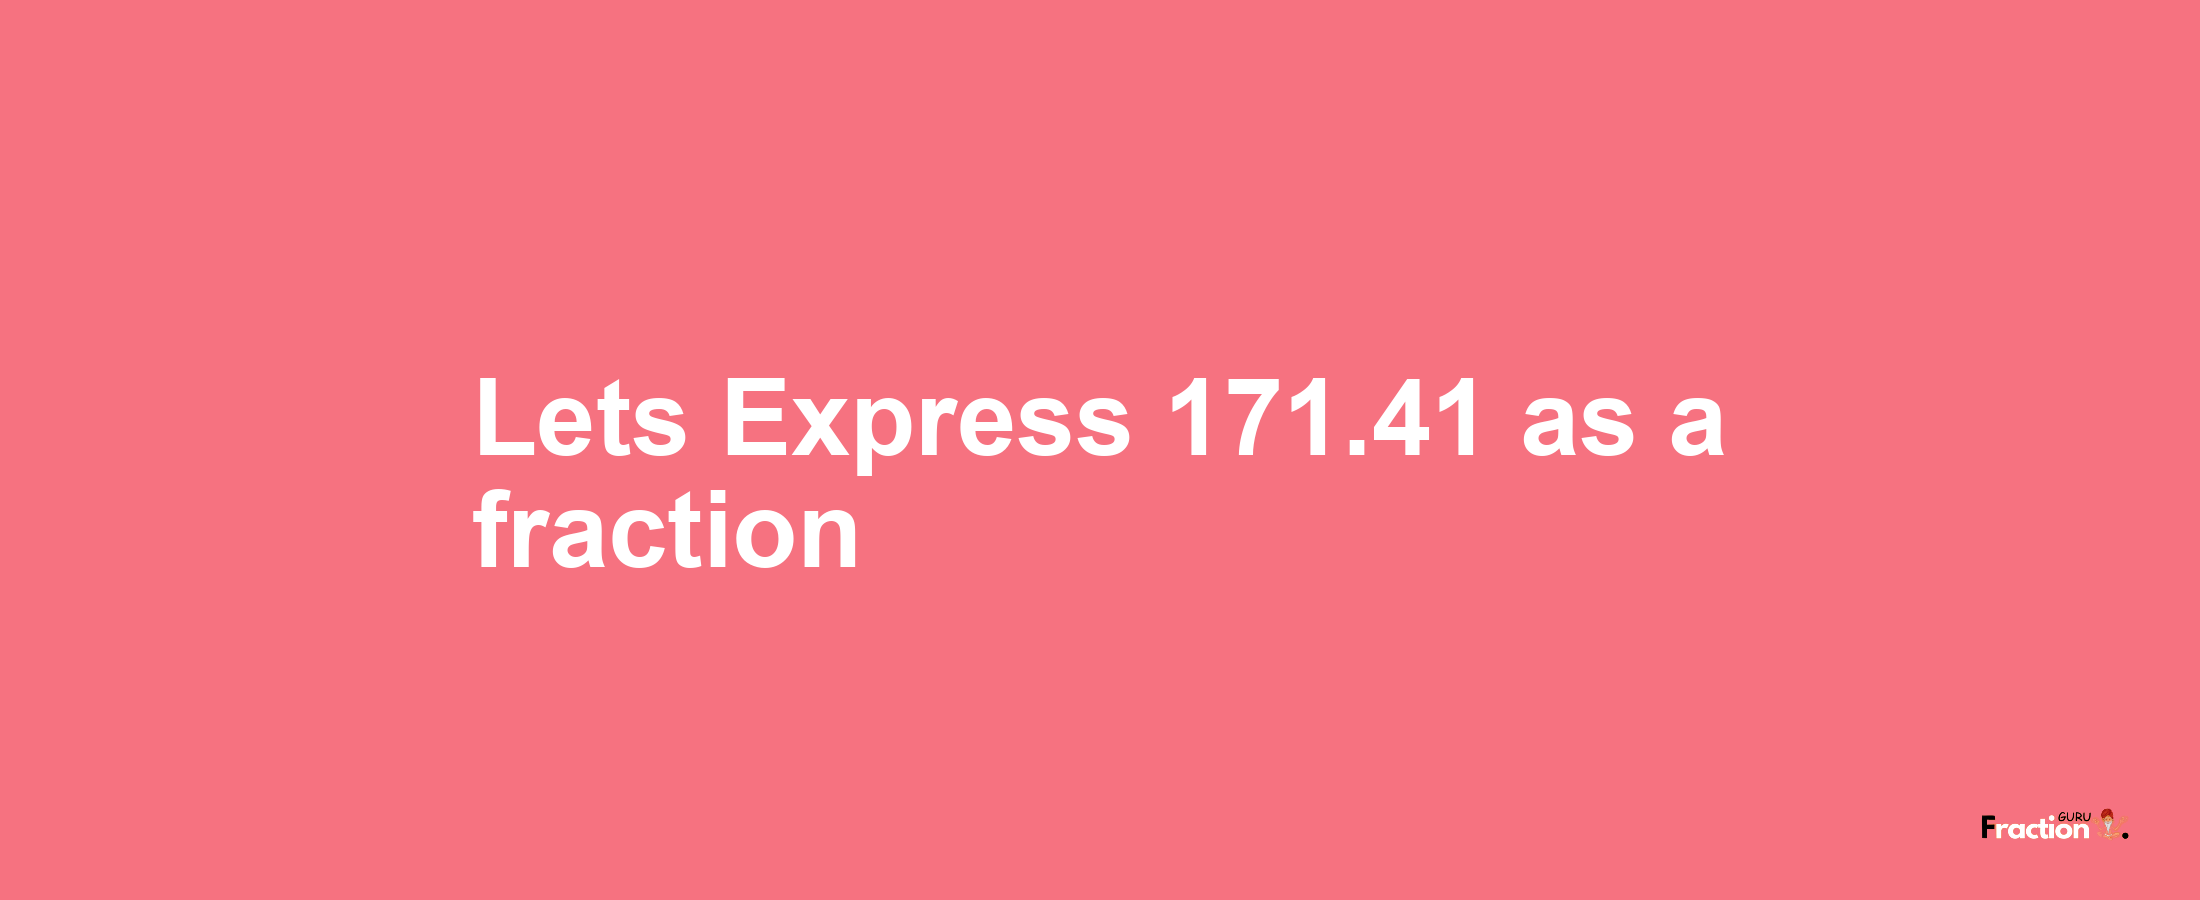 Lets Express 171.41 as afraction